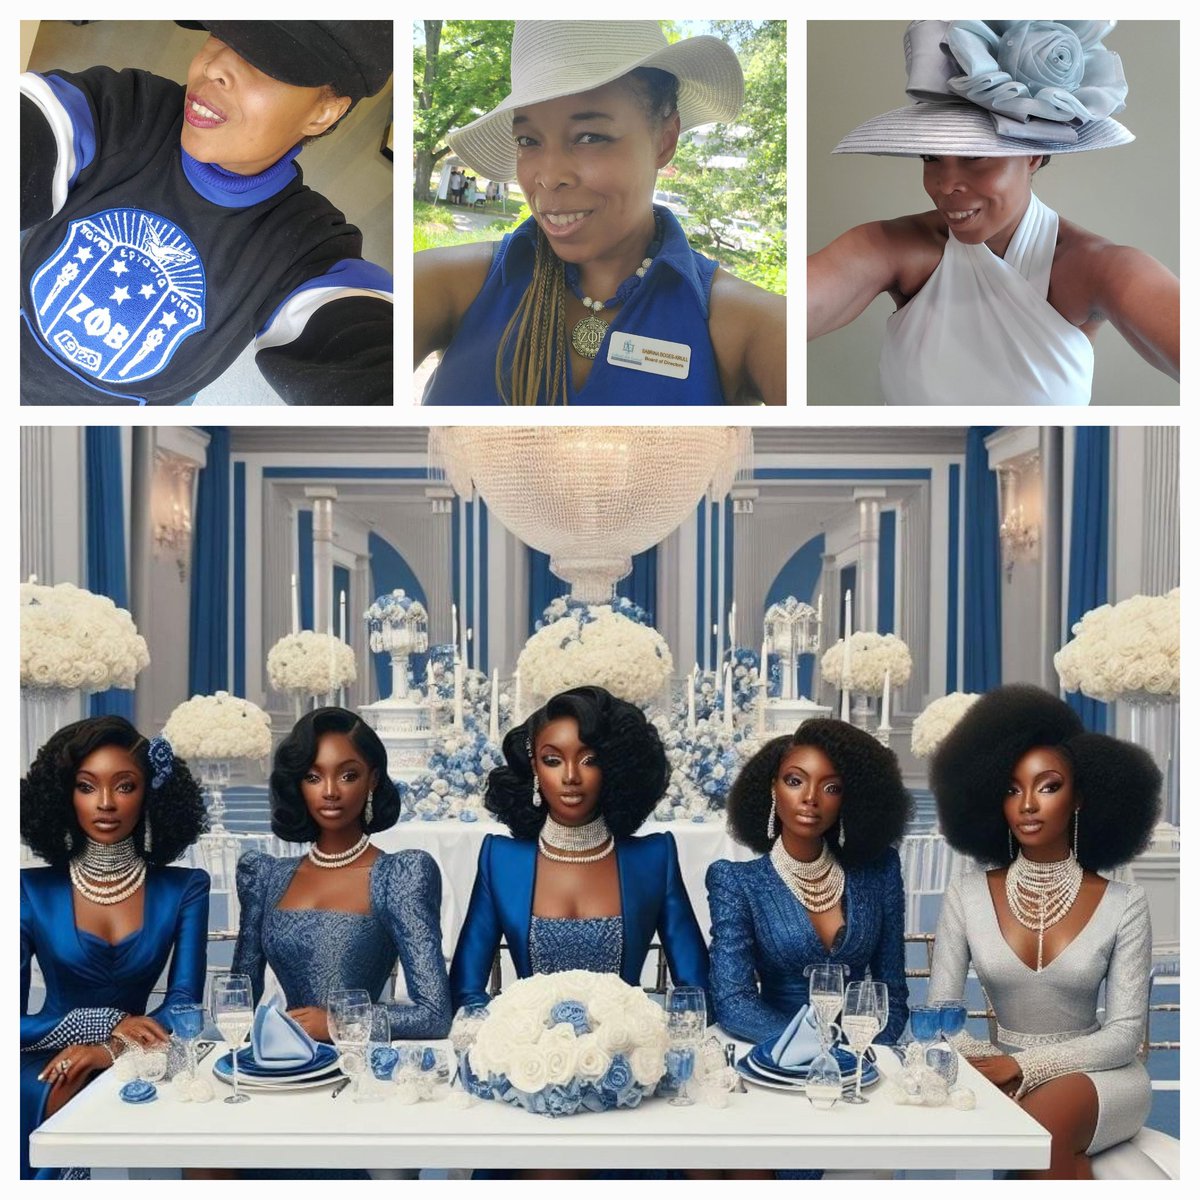 'I say my Sorors- You looking good today!' Happy Founders' Day to the Dovely Ladies of Zeta Phi Beta Sorority, Inc. Here's to 104 years of being 'community conscious and action oriented. ' #ZPhiB104 #zphibga #divine9 #nphcgreeks